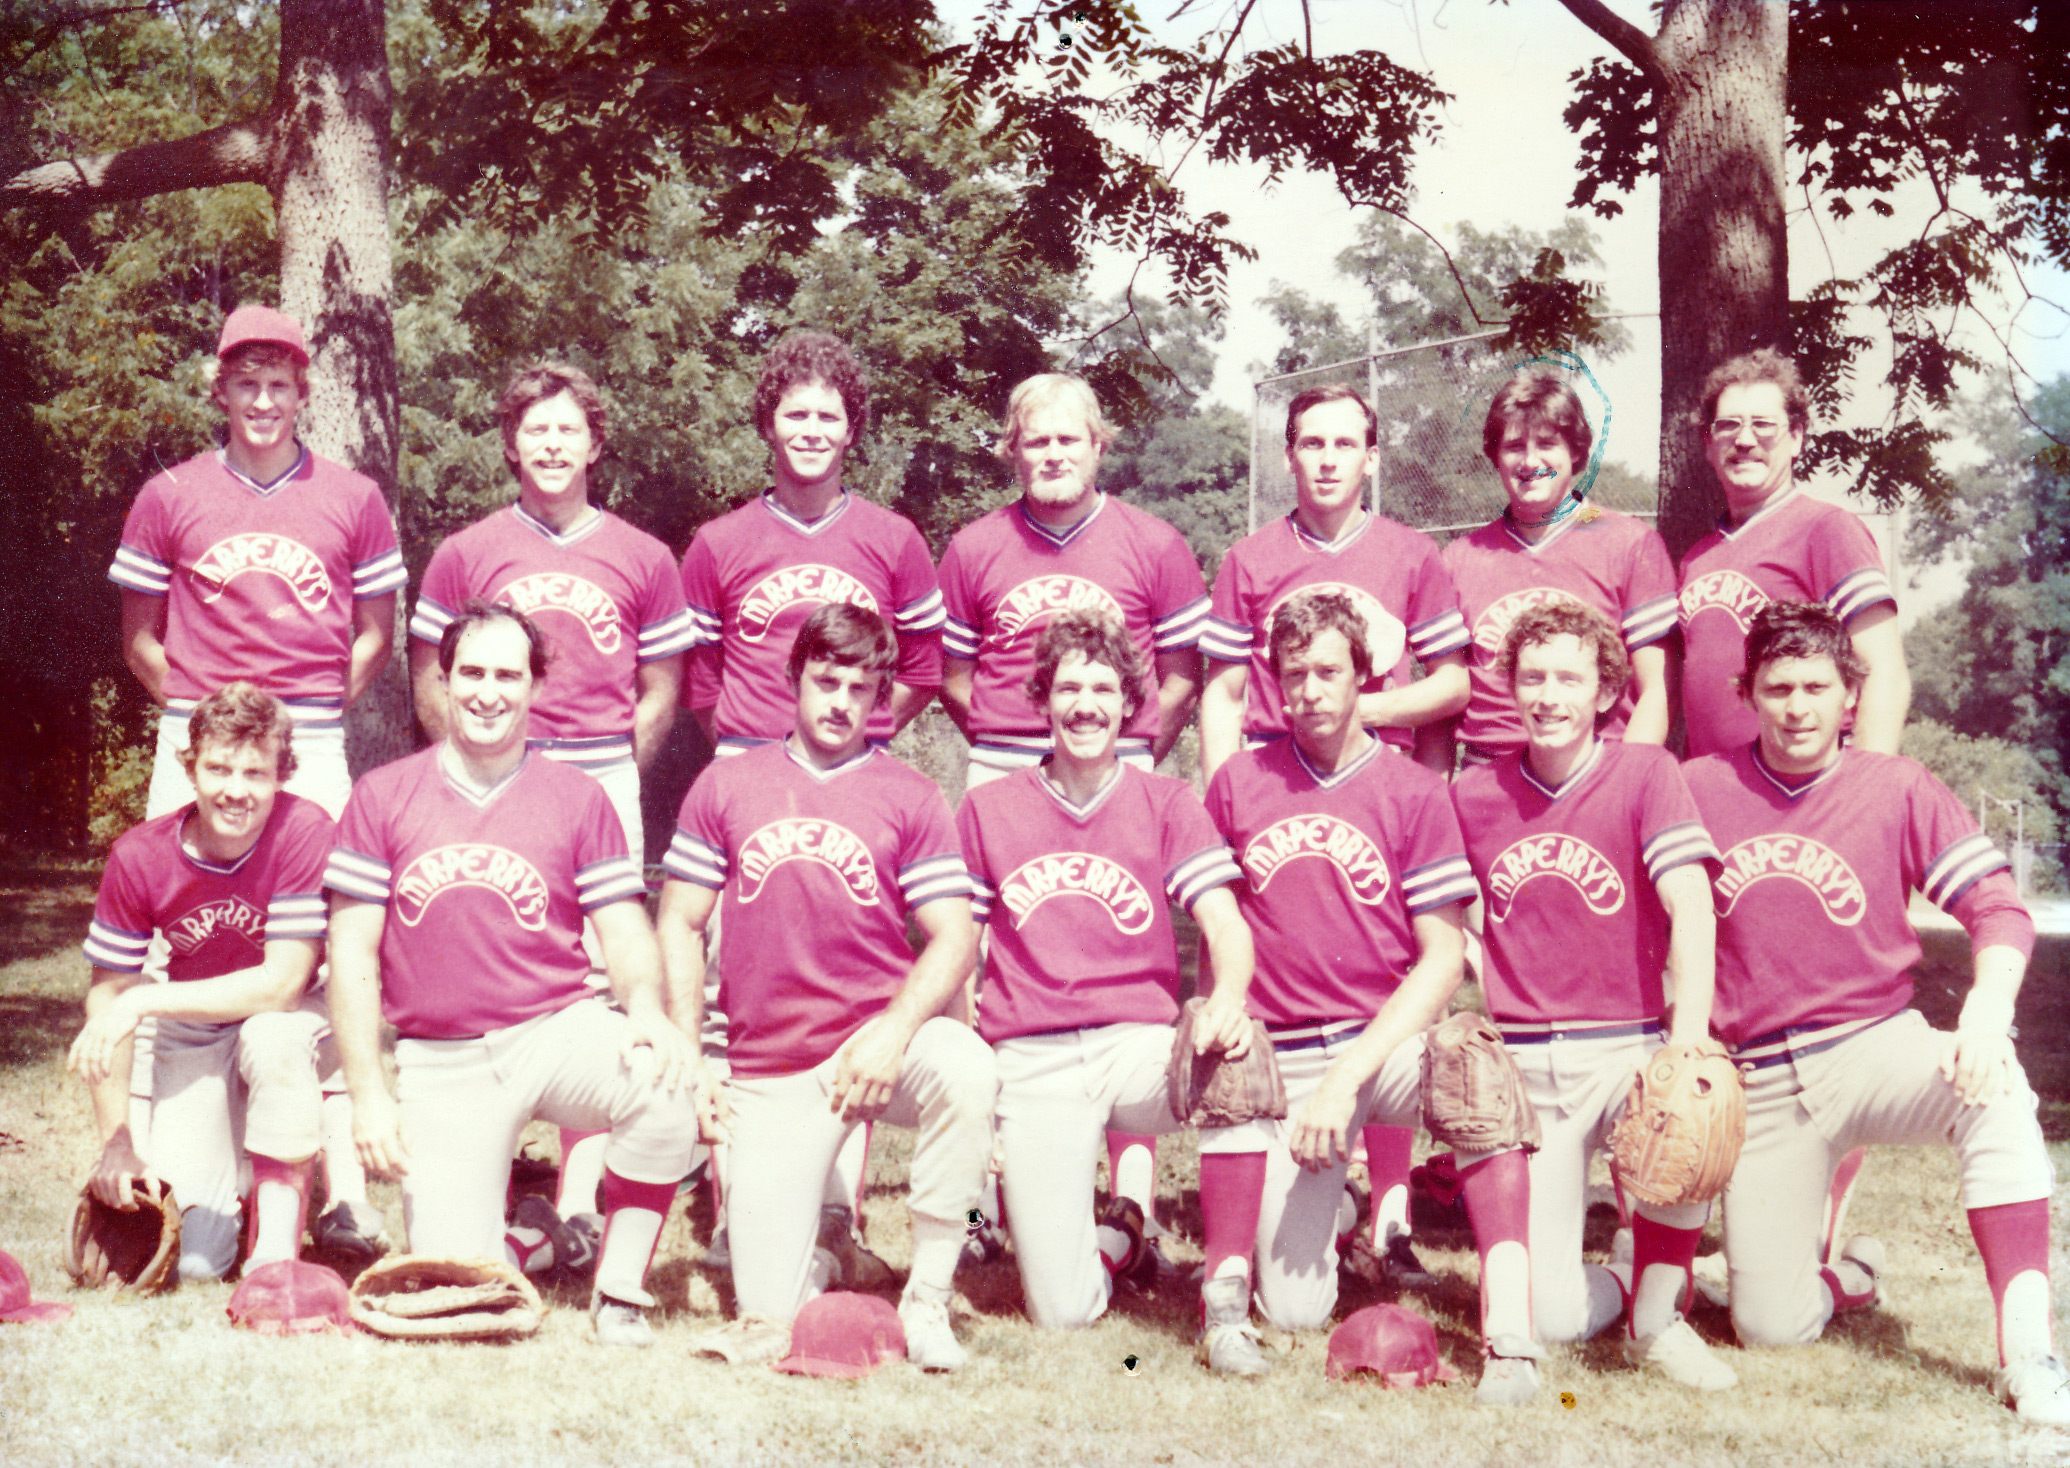 Jim Butler coached a young league in Osterville before the children were old enough to play in Barnstable’s Little League. These young athletes later became some of the all-starts on Barnstable’s Little League due to their early training.